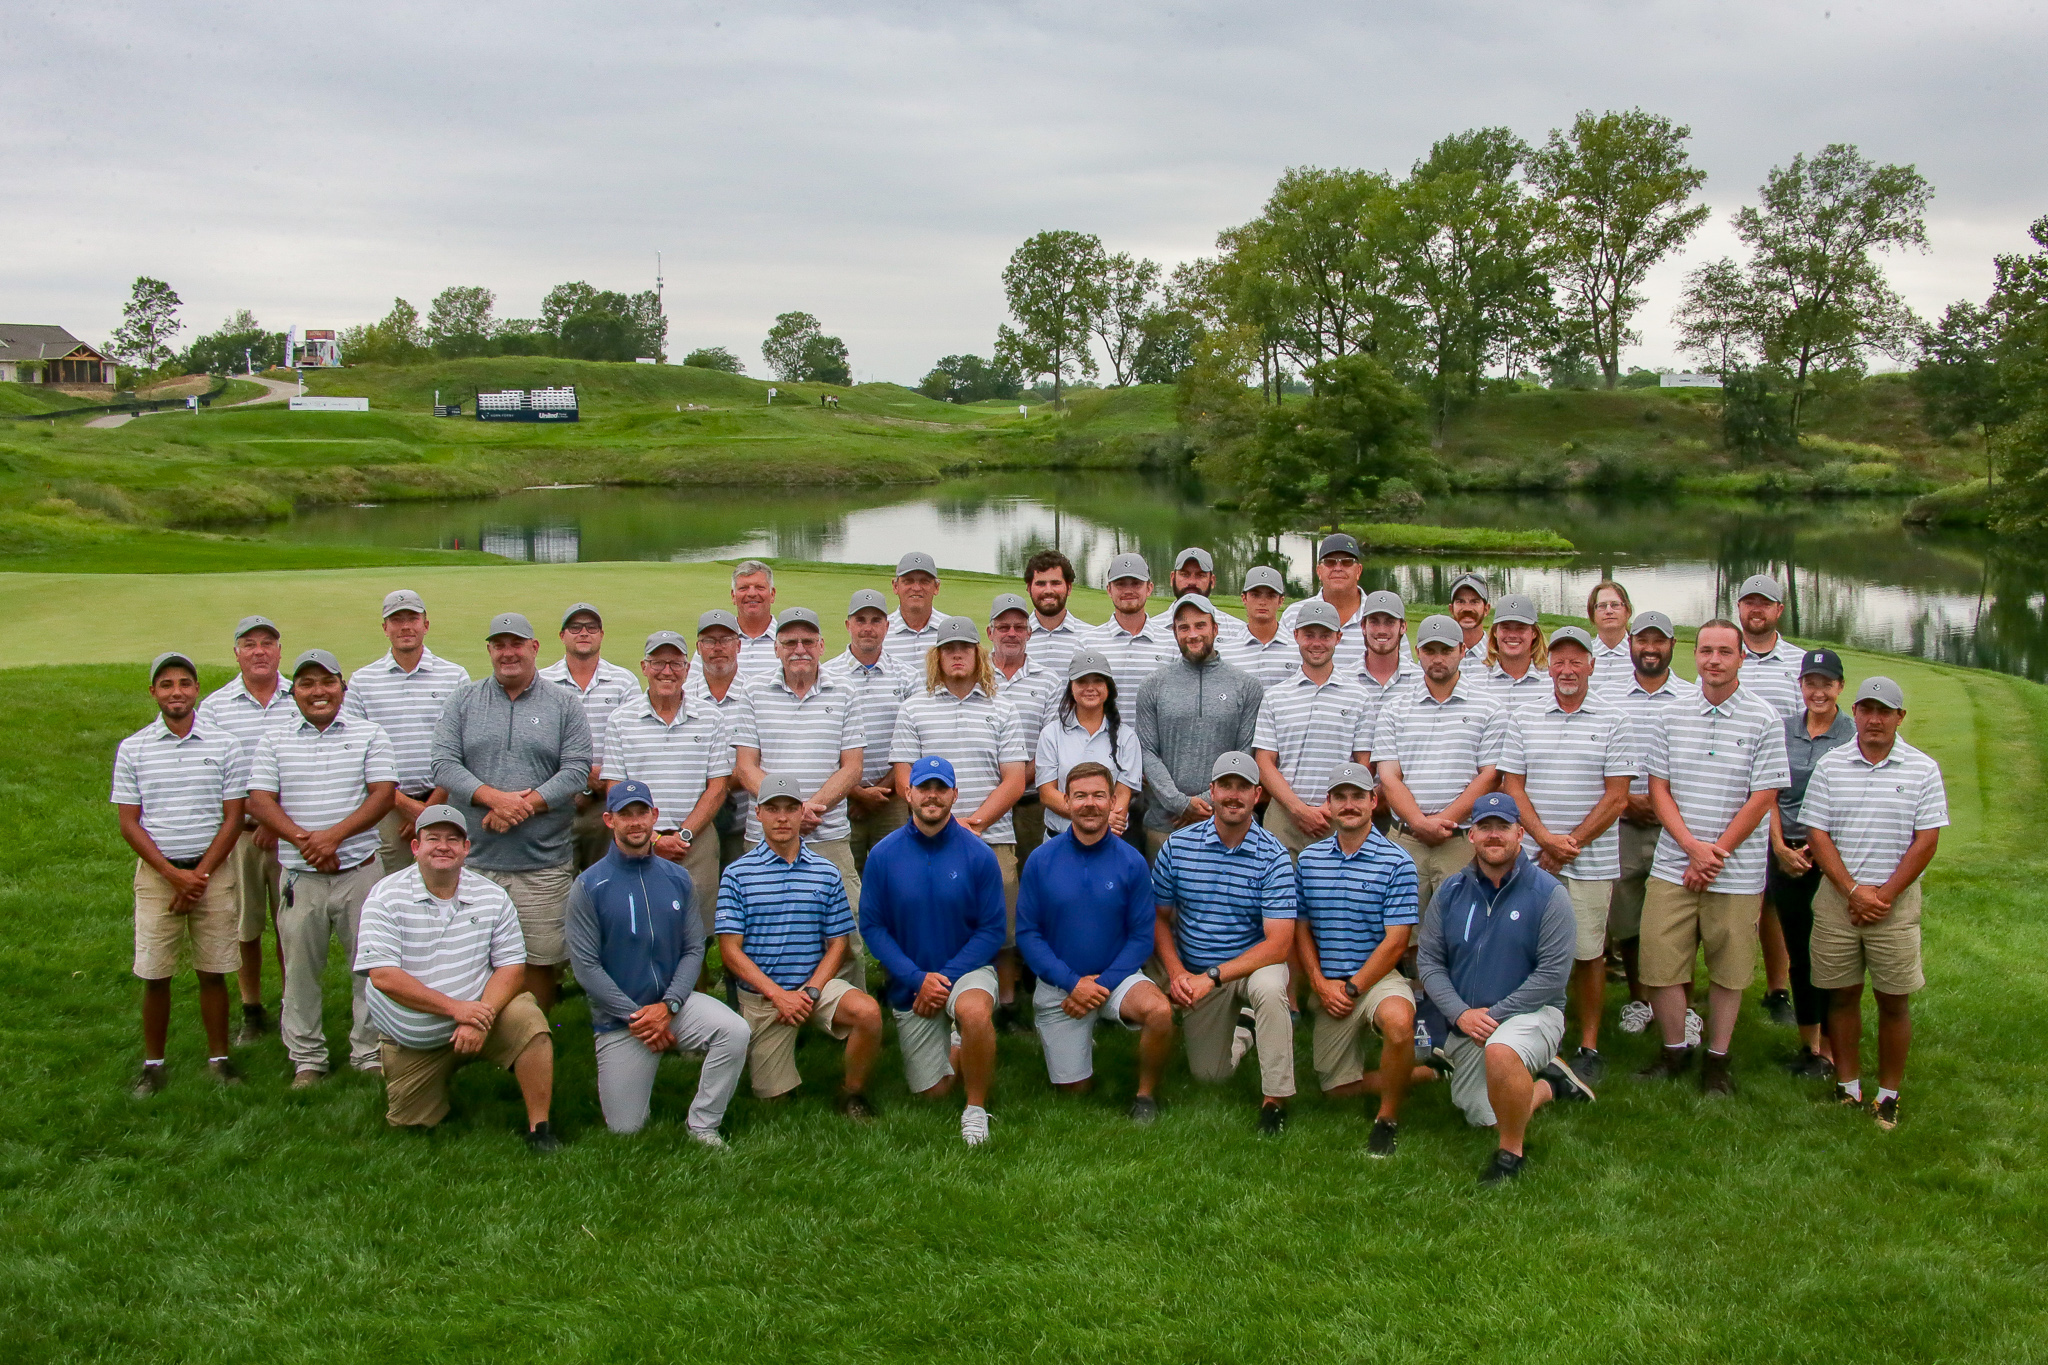 2021 Agronomic Team photo at Victoria National for the Korn Ferry Tour Championship